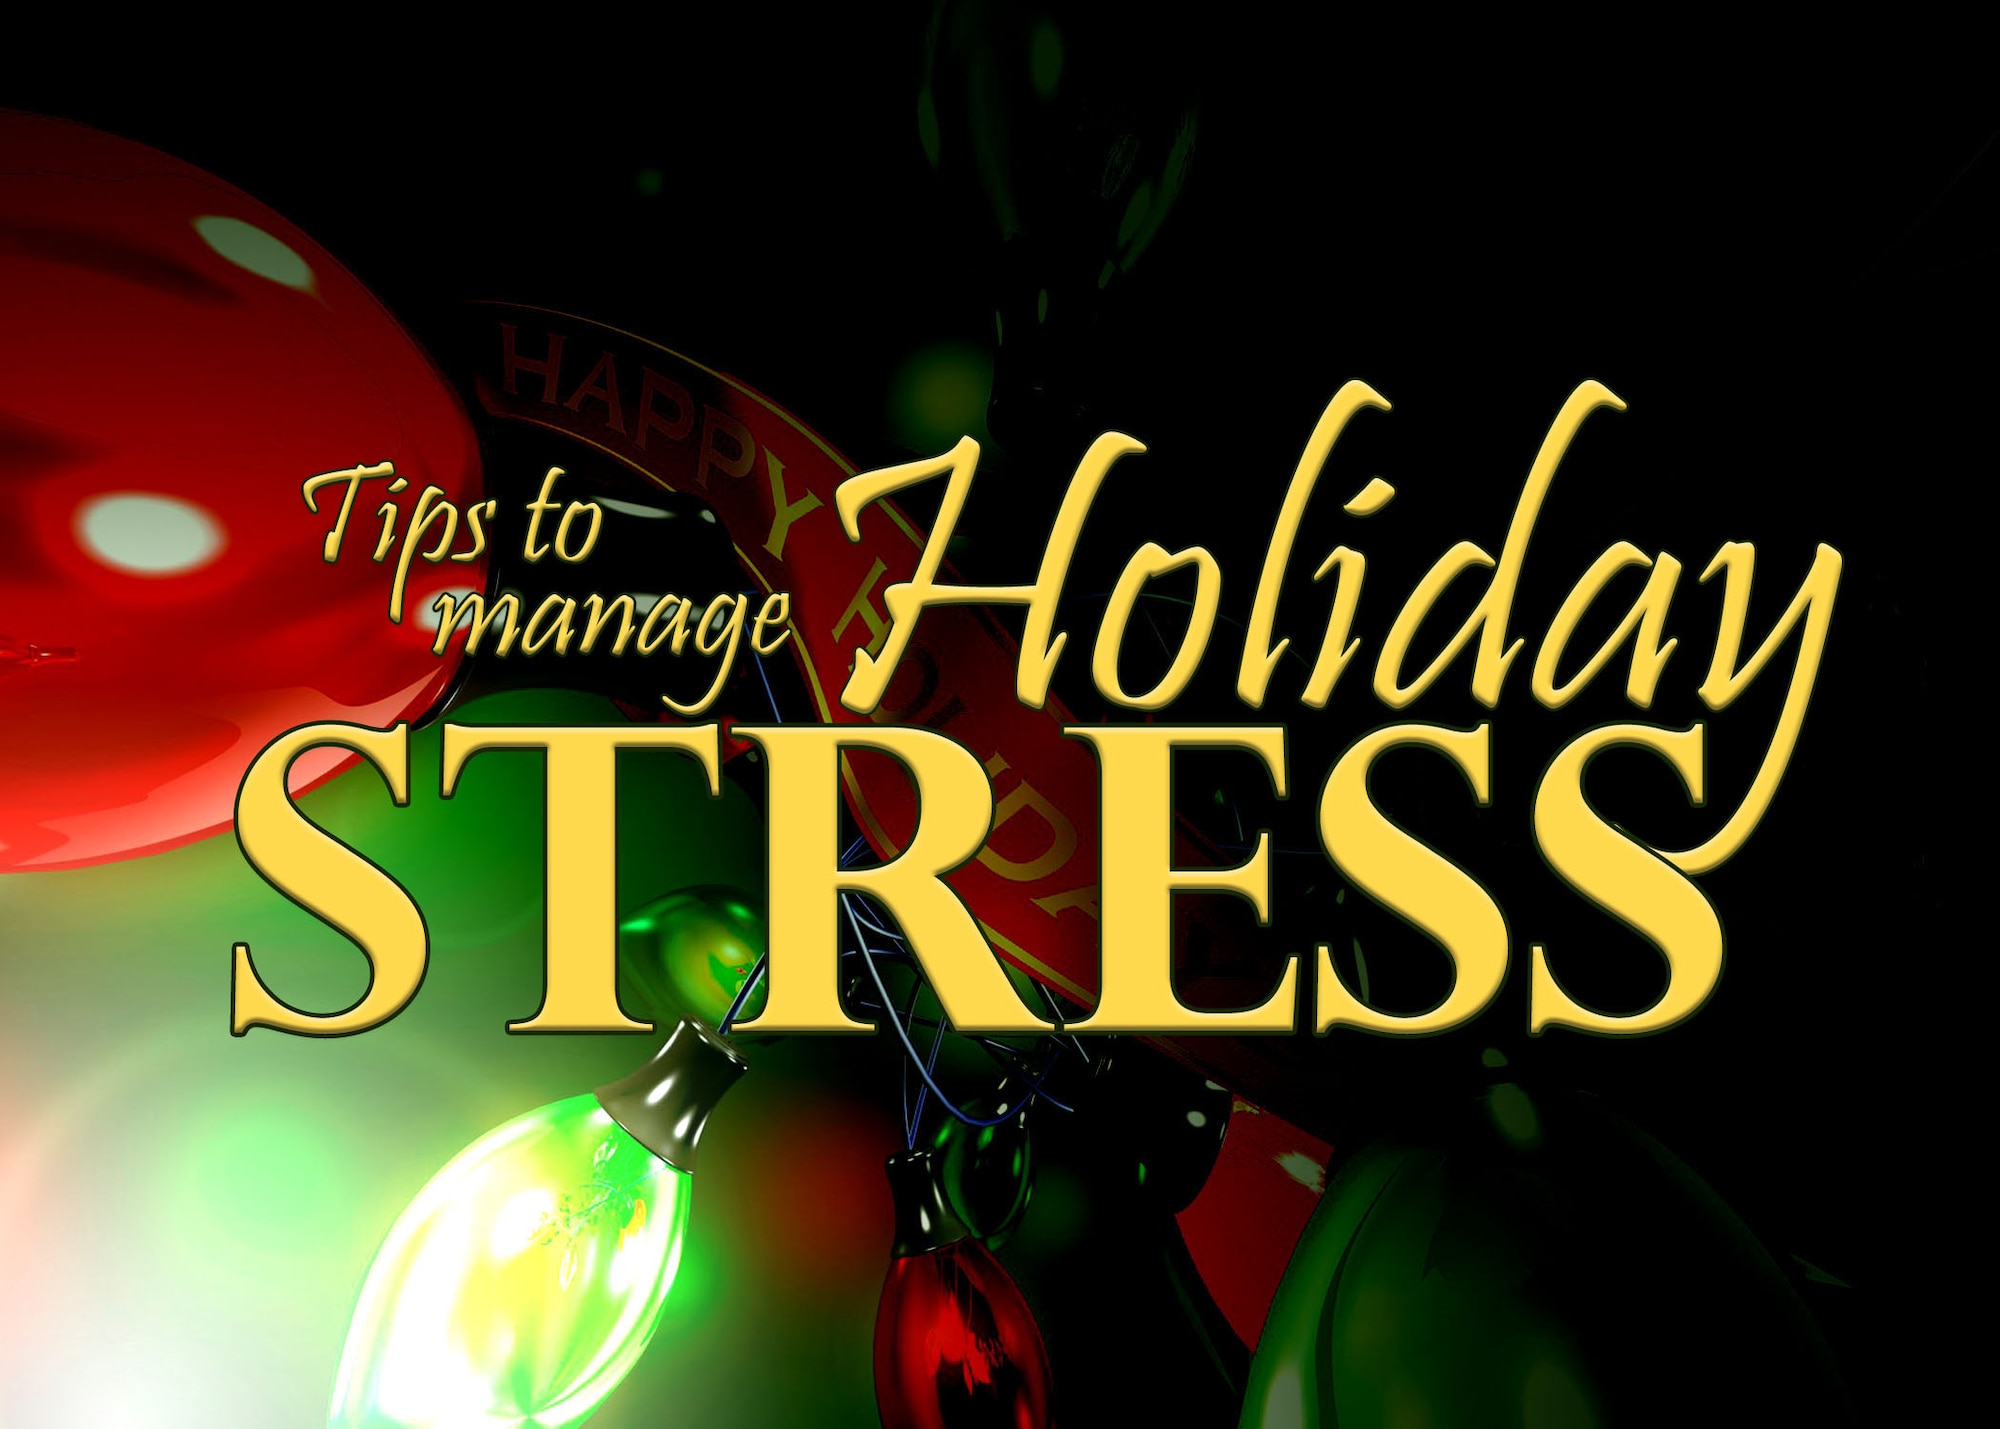 graphic of Christmas lights with words tips to manage holiday stress